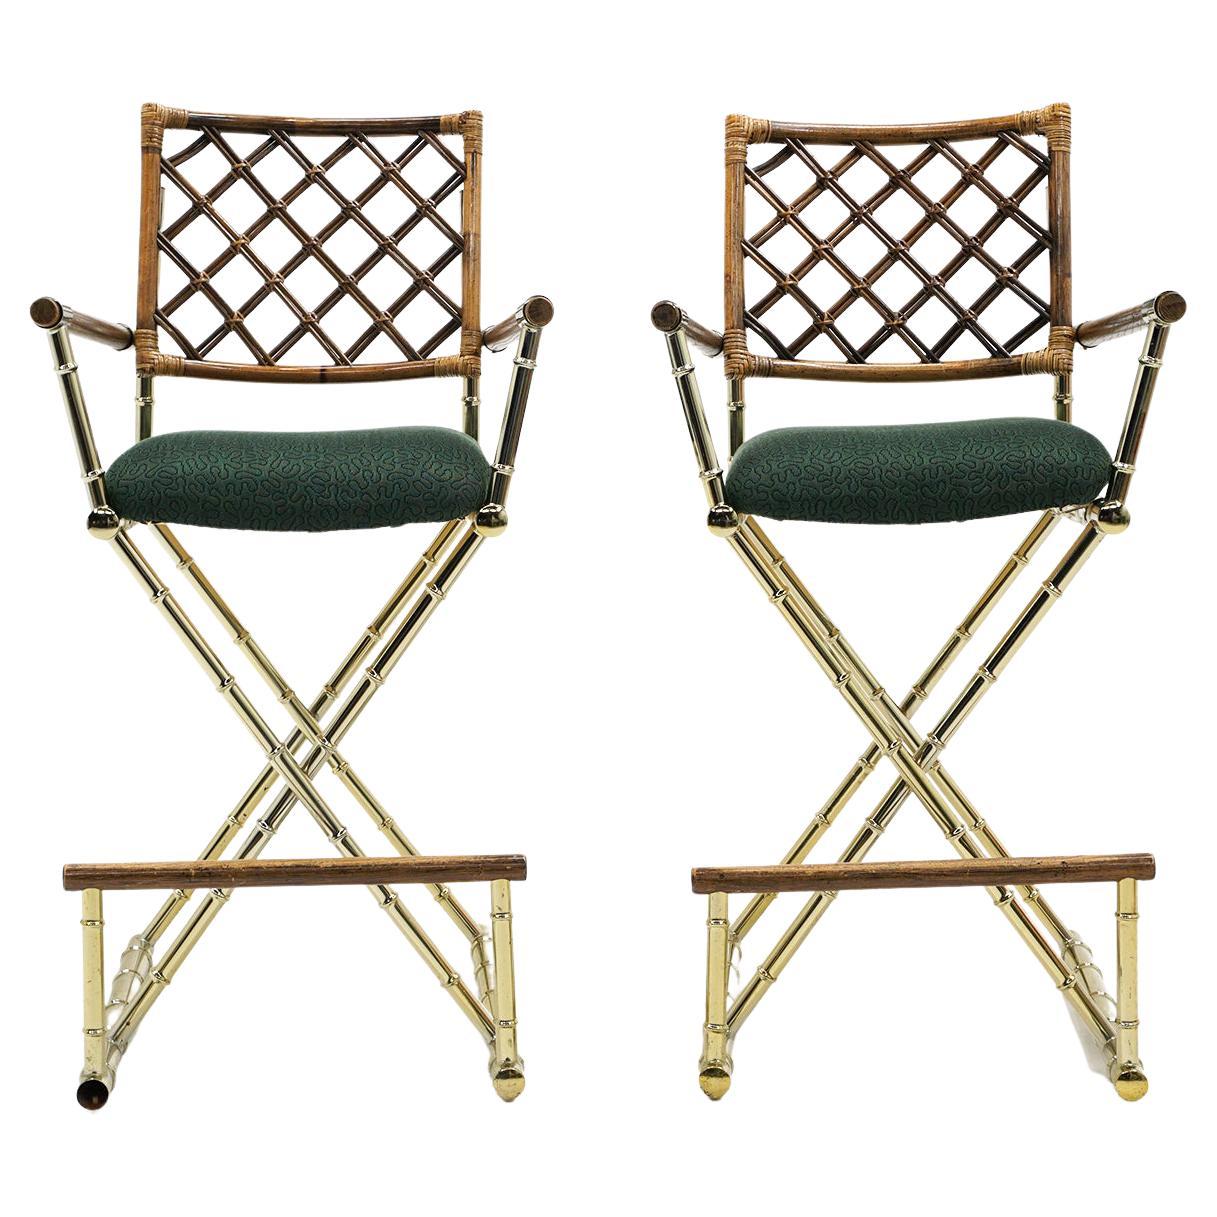 Pair of Campaign Style Bar Stools w/ Backs & Arms in Brass, Bamboo, and Rattan